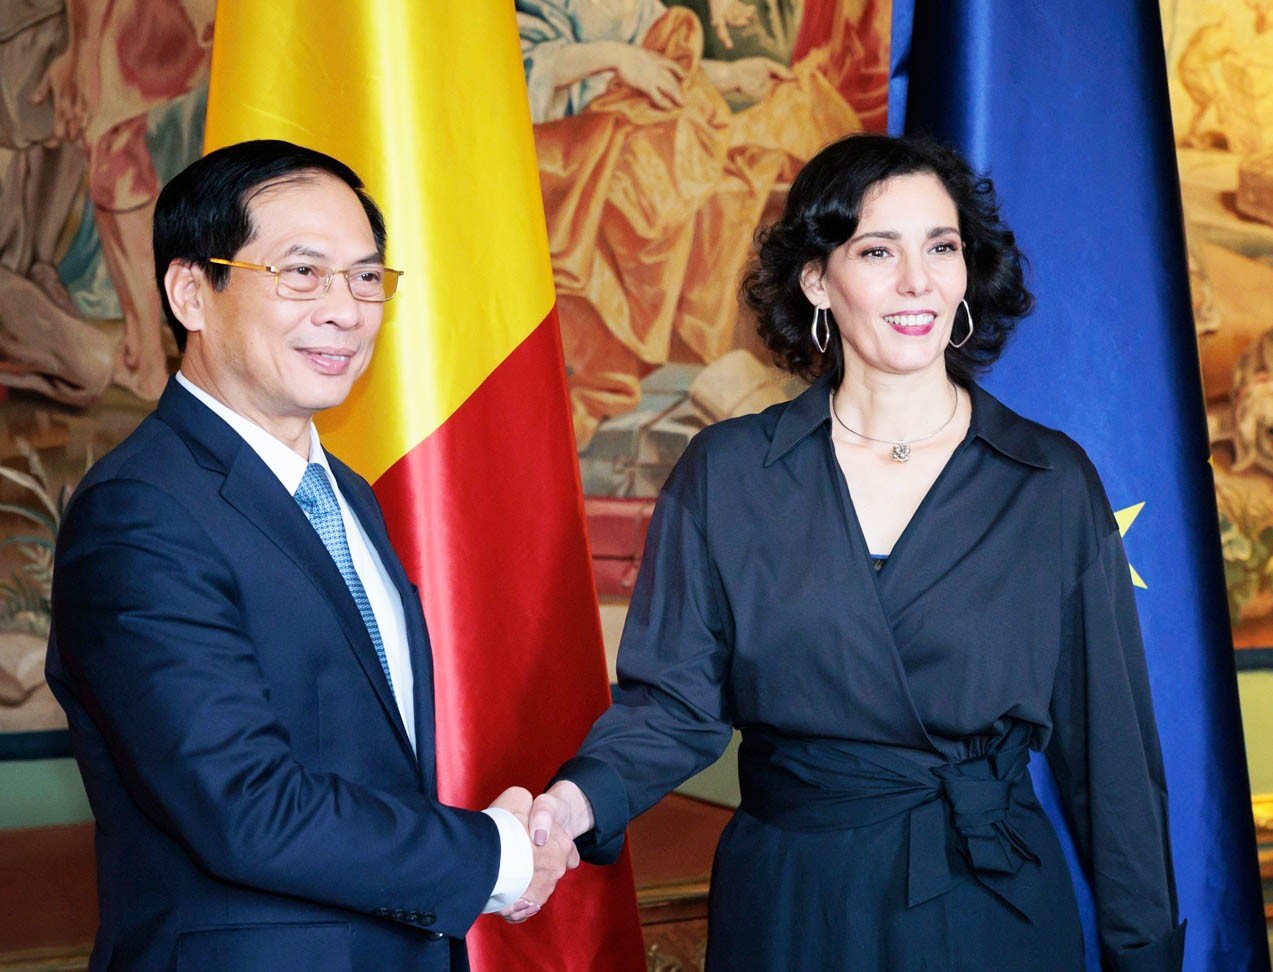 Foreign Minister Bui Thanh Son meets with Belgium leaders in Brussel